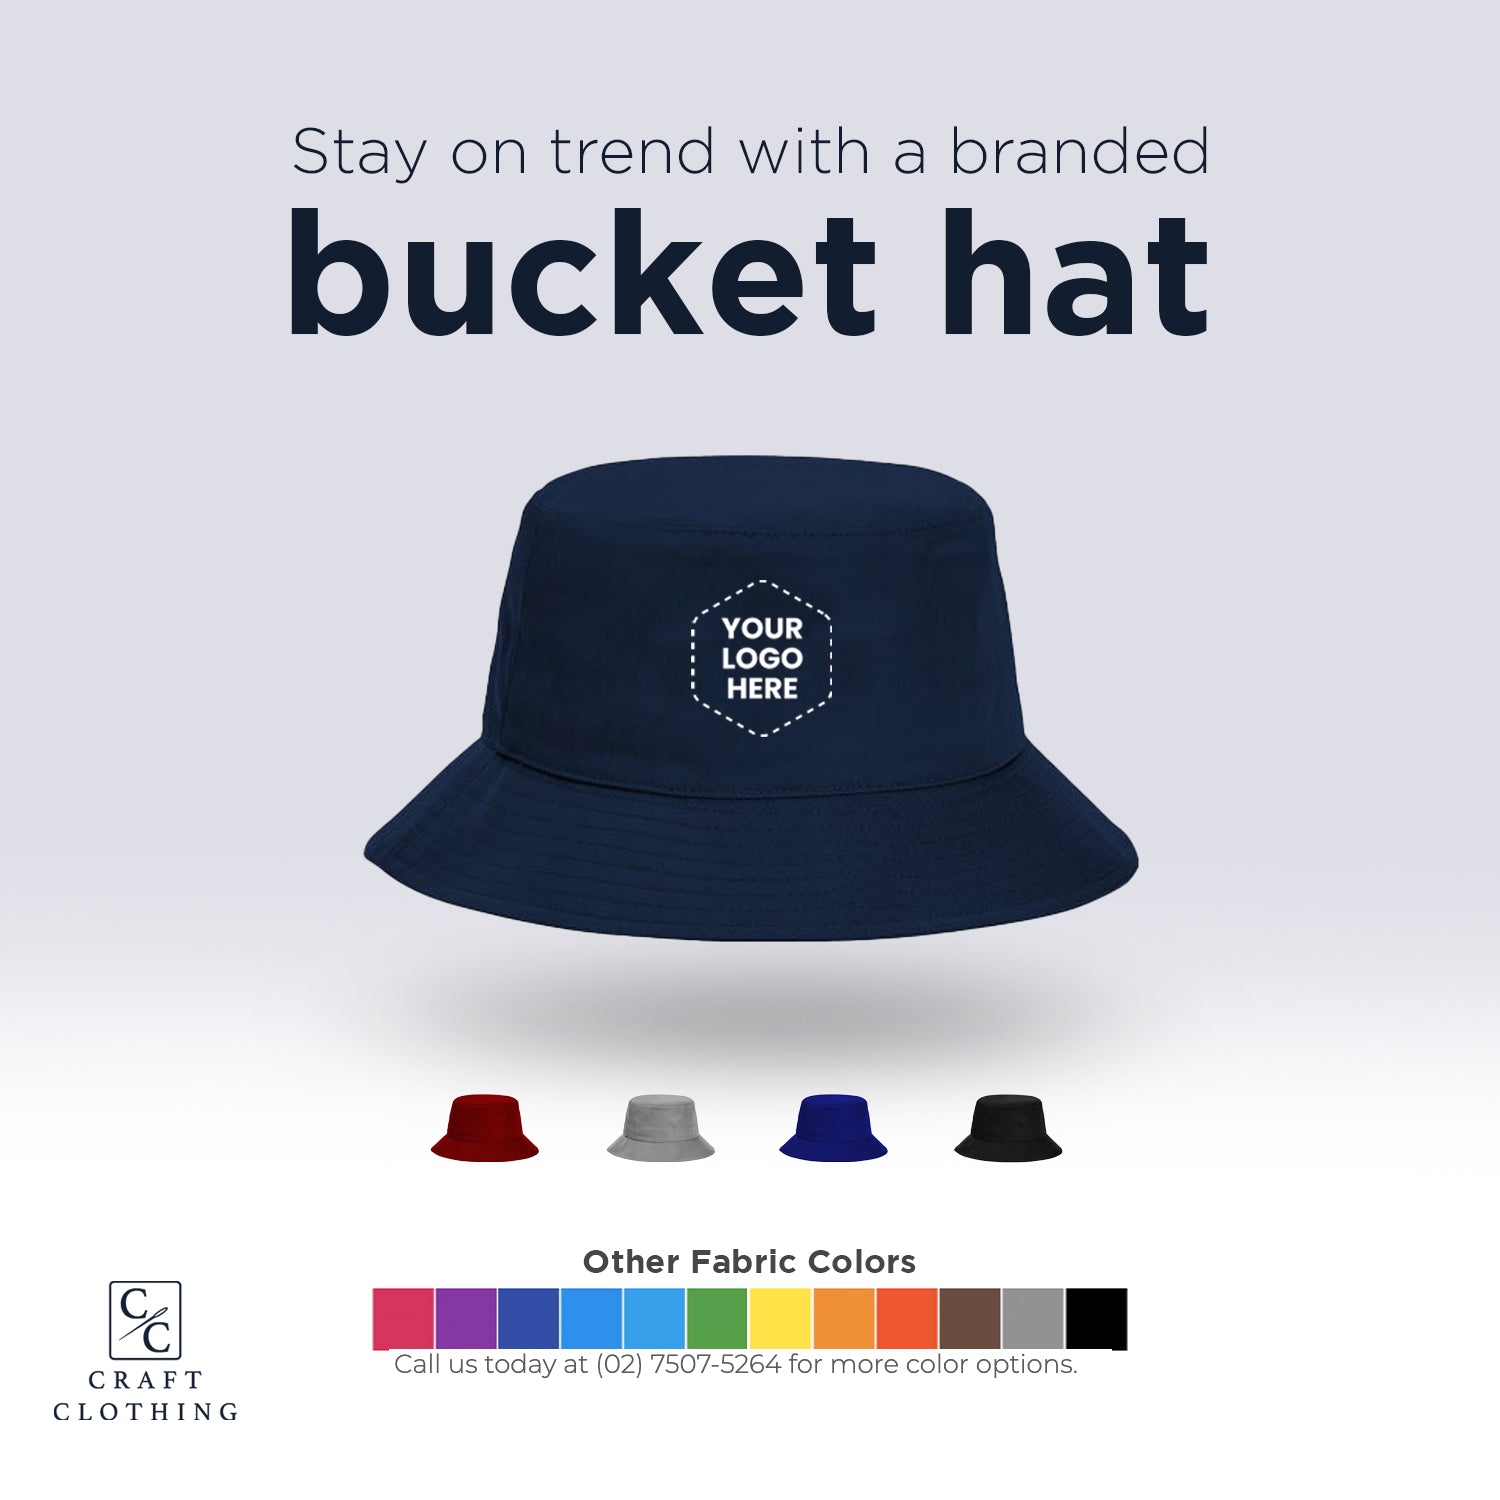 Stay on trend with a branded bucket hat